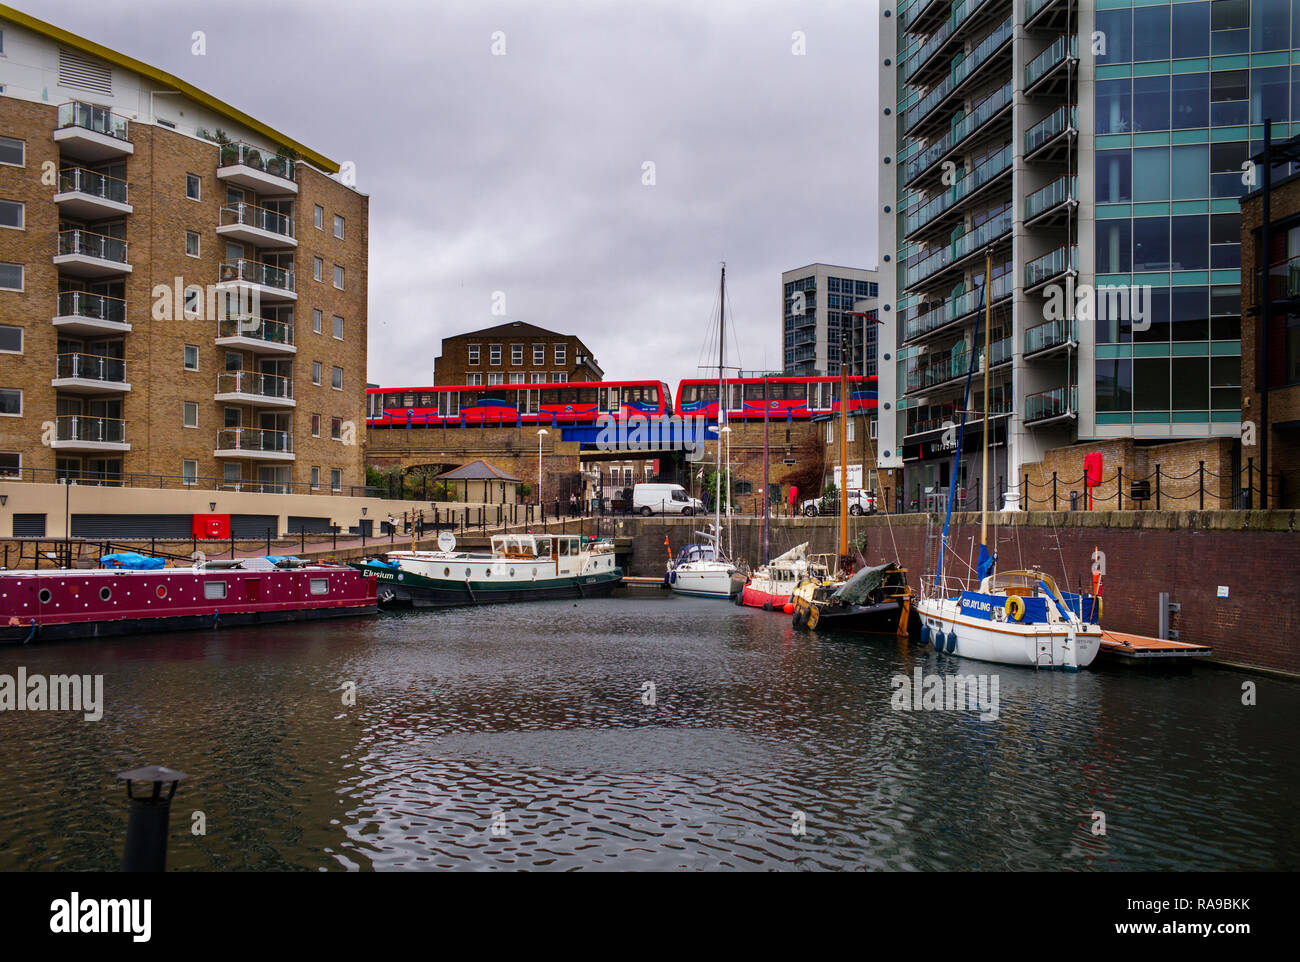 Limehouse Basin, Limehouse East London England showing modern architecture and the Docklands Light Railway-DLR, Dec 2018 Stock Photo